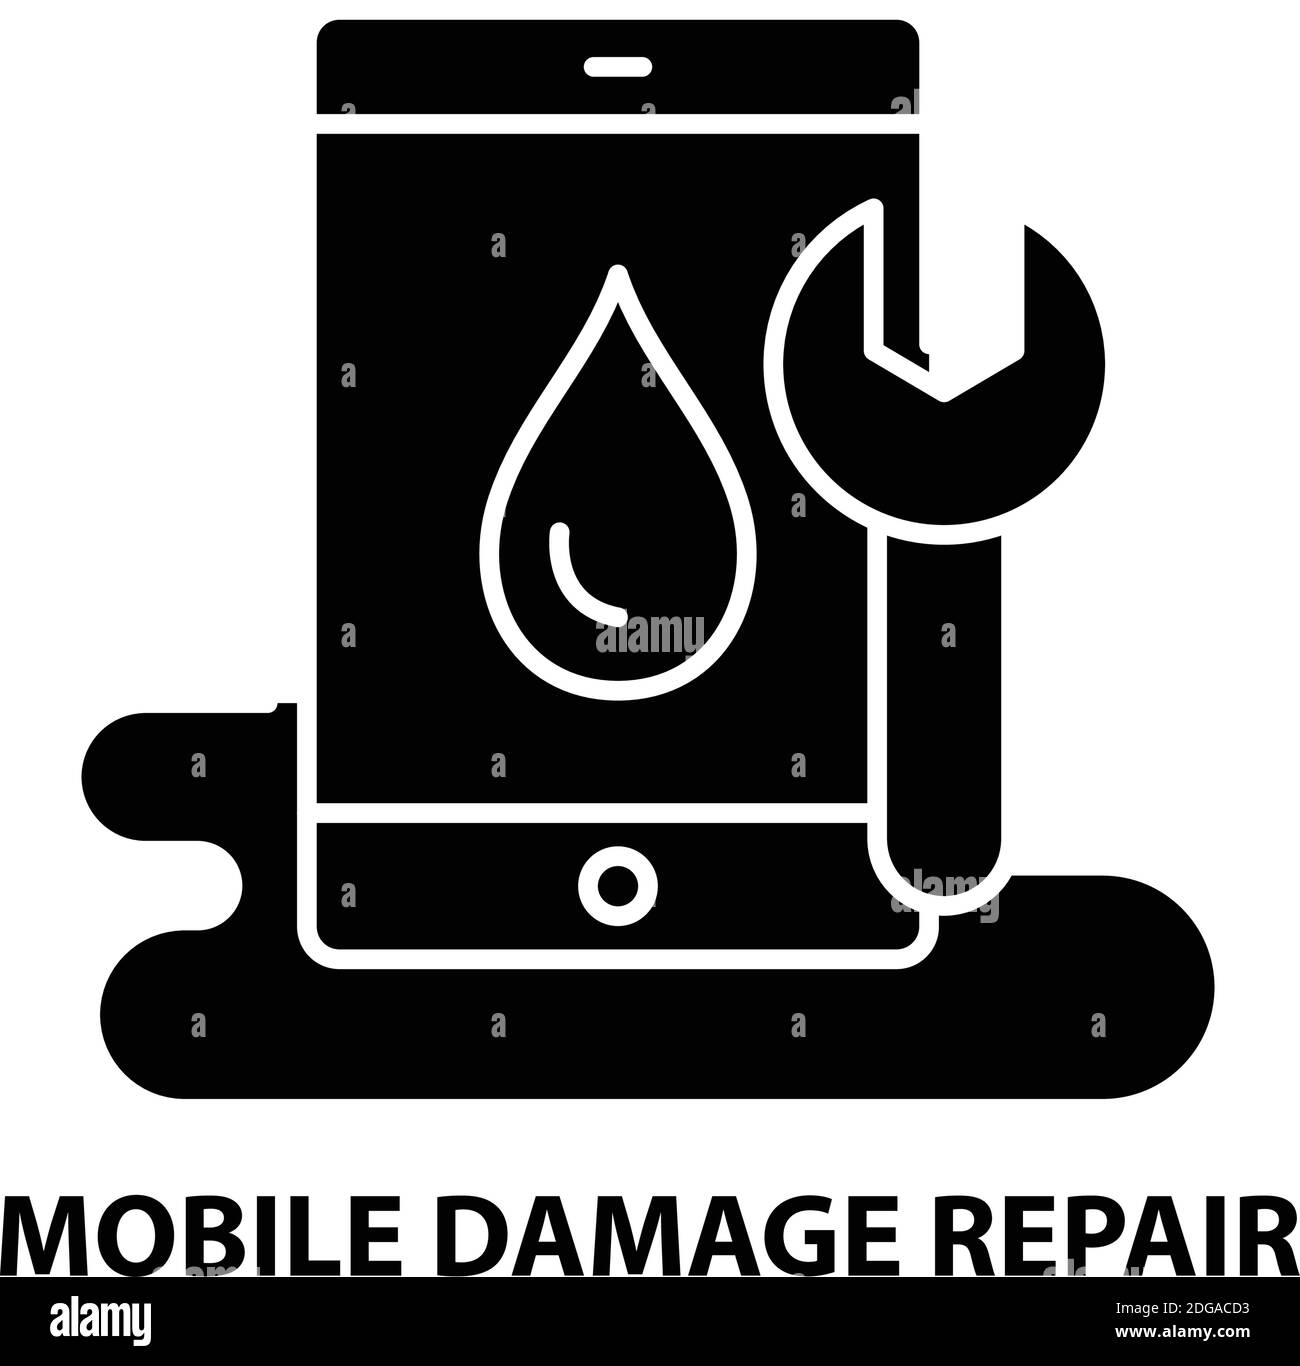 mobile damage repair icon, black vector sign with editable strokes, concept illustration Stock Vector